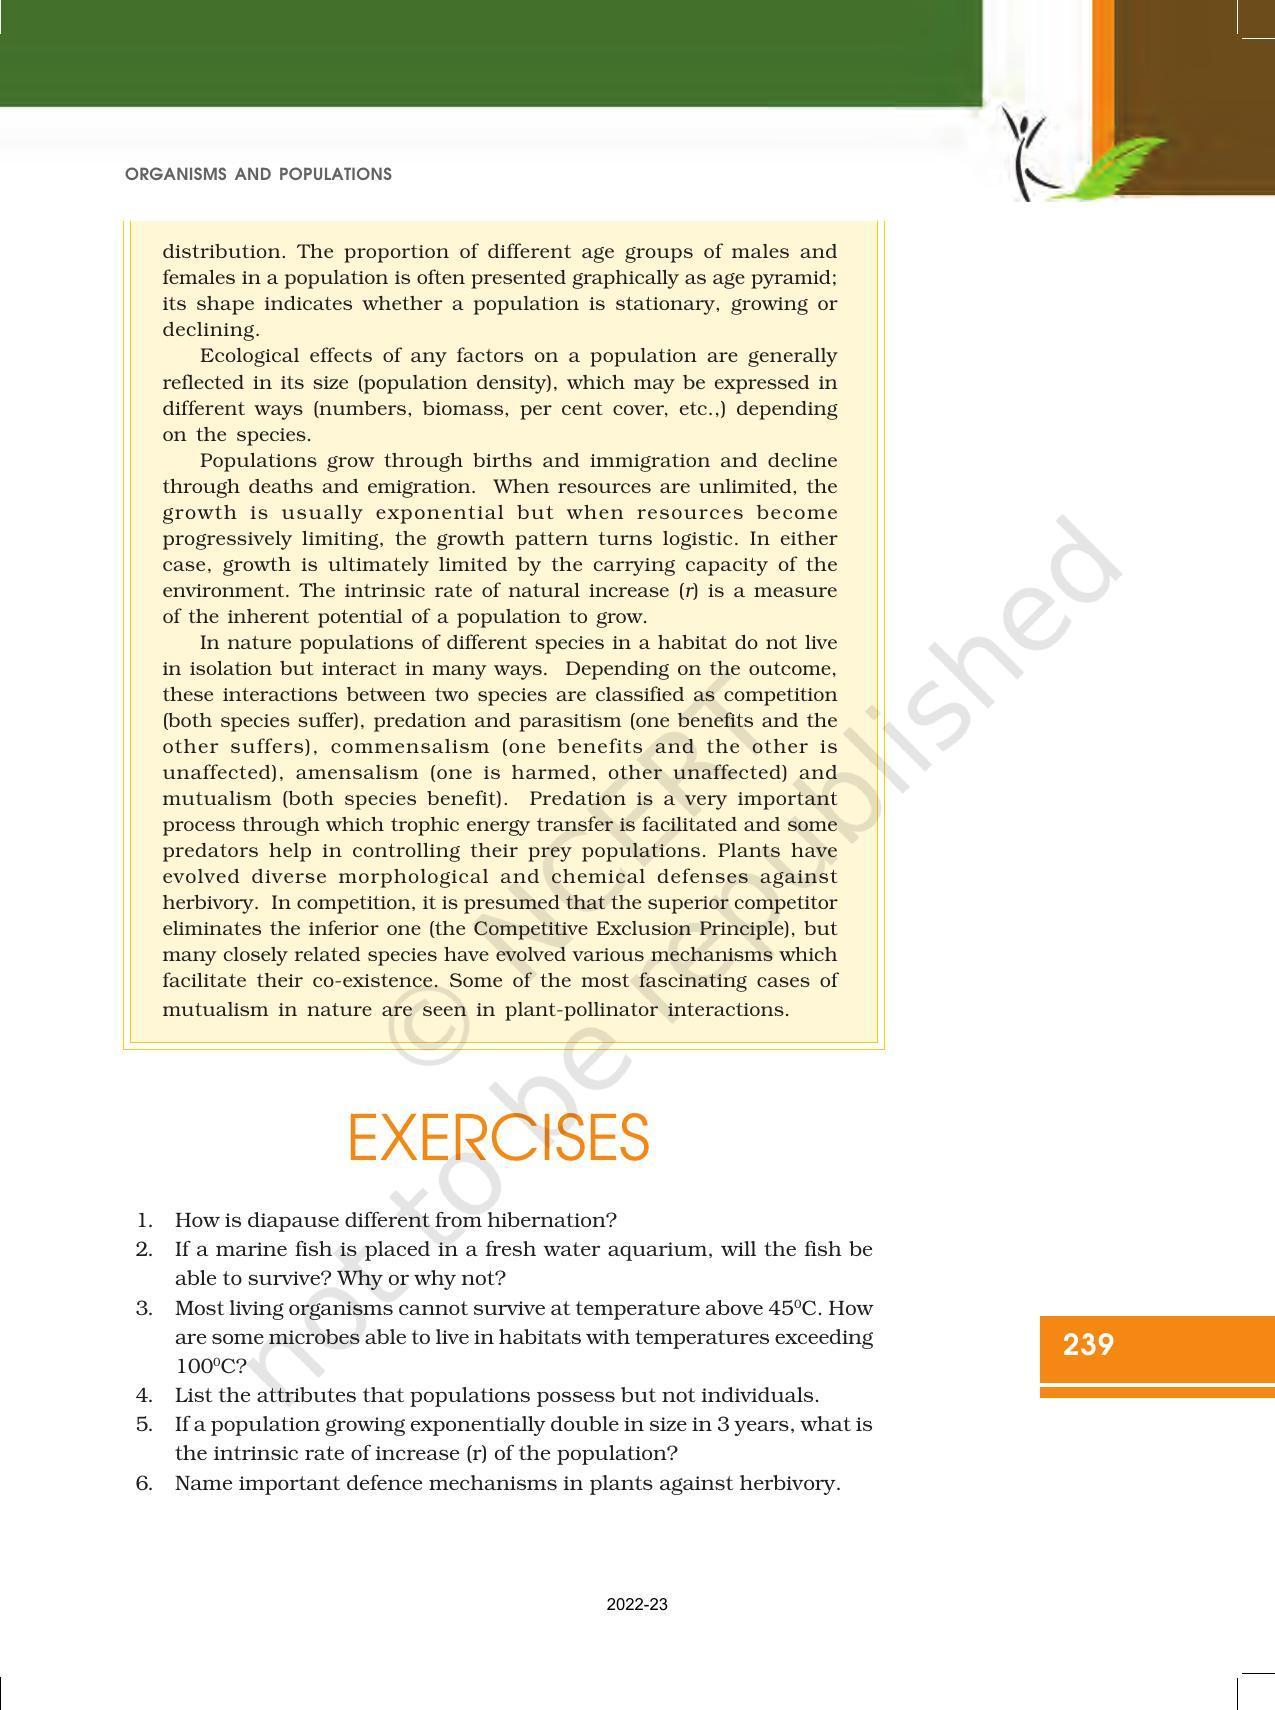 NCERT Book for Class 12 Biology Chapter 13 Organisms and Populations - Page 23